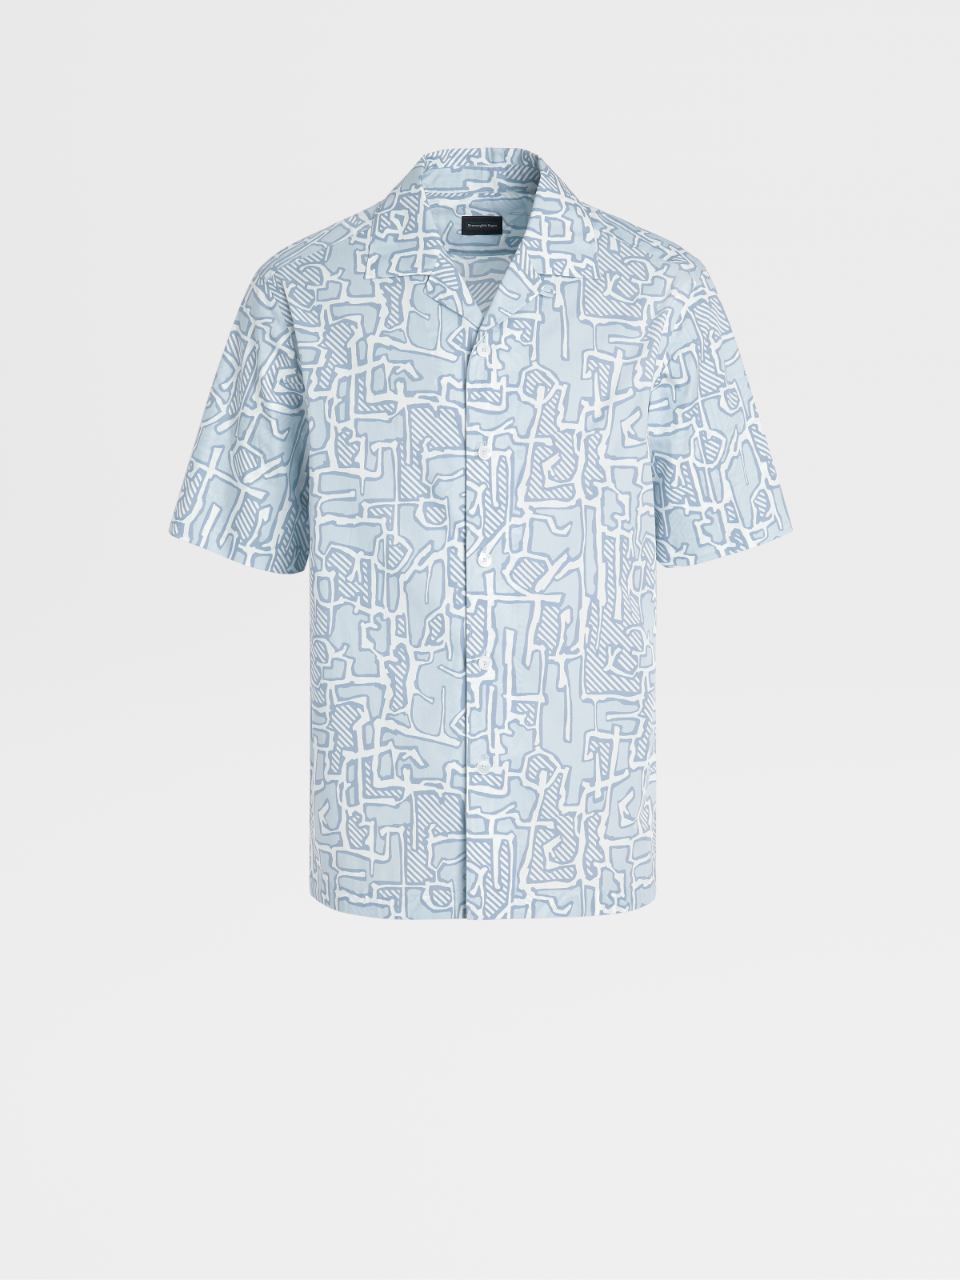 Light Blue and White Printed Pure Cotton Short-sleeve Shirt, Regular Fit